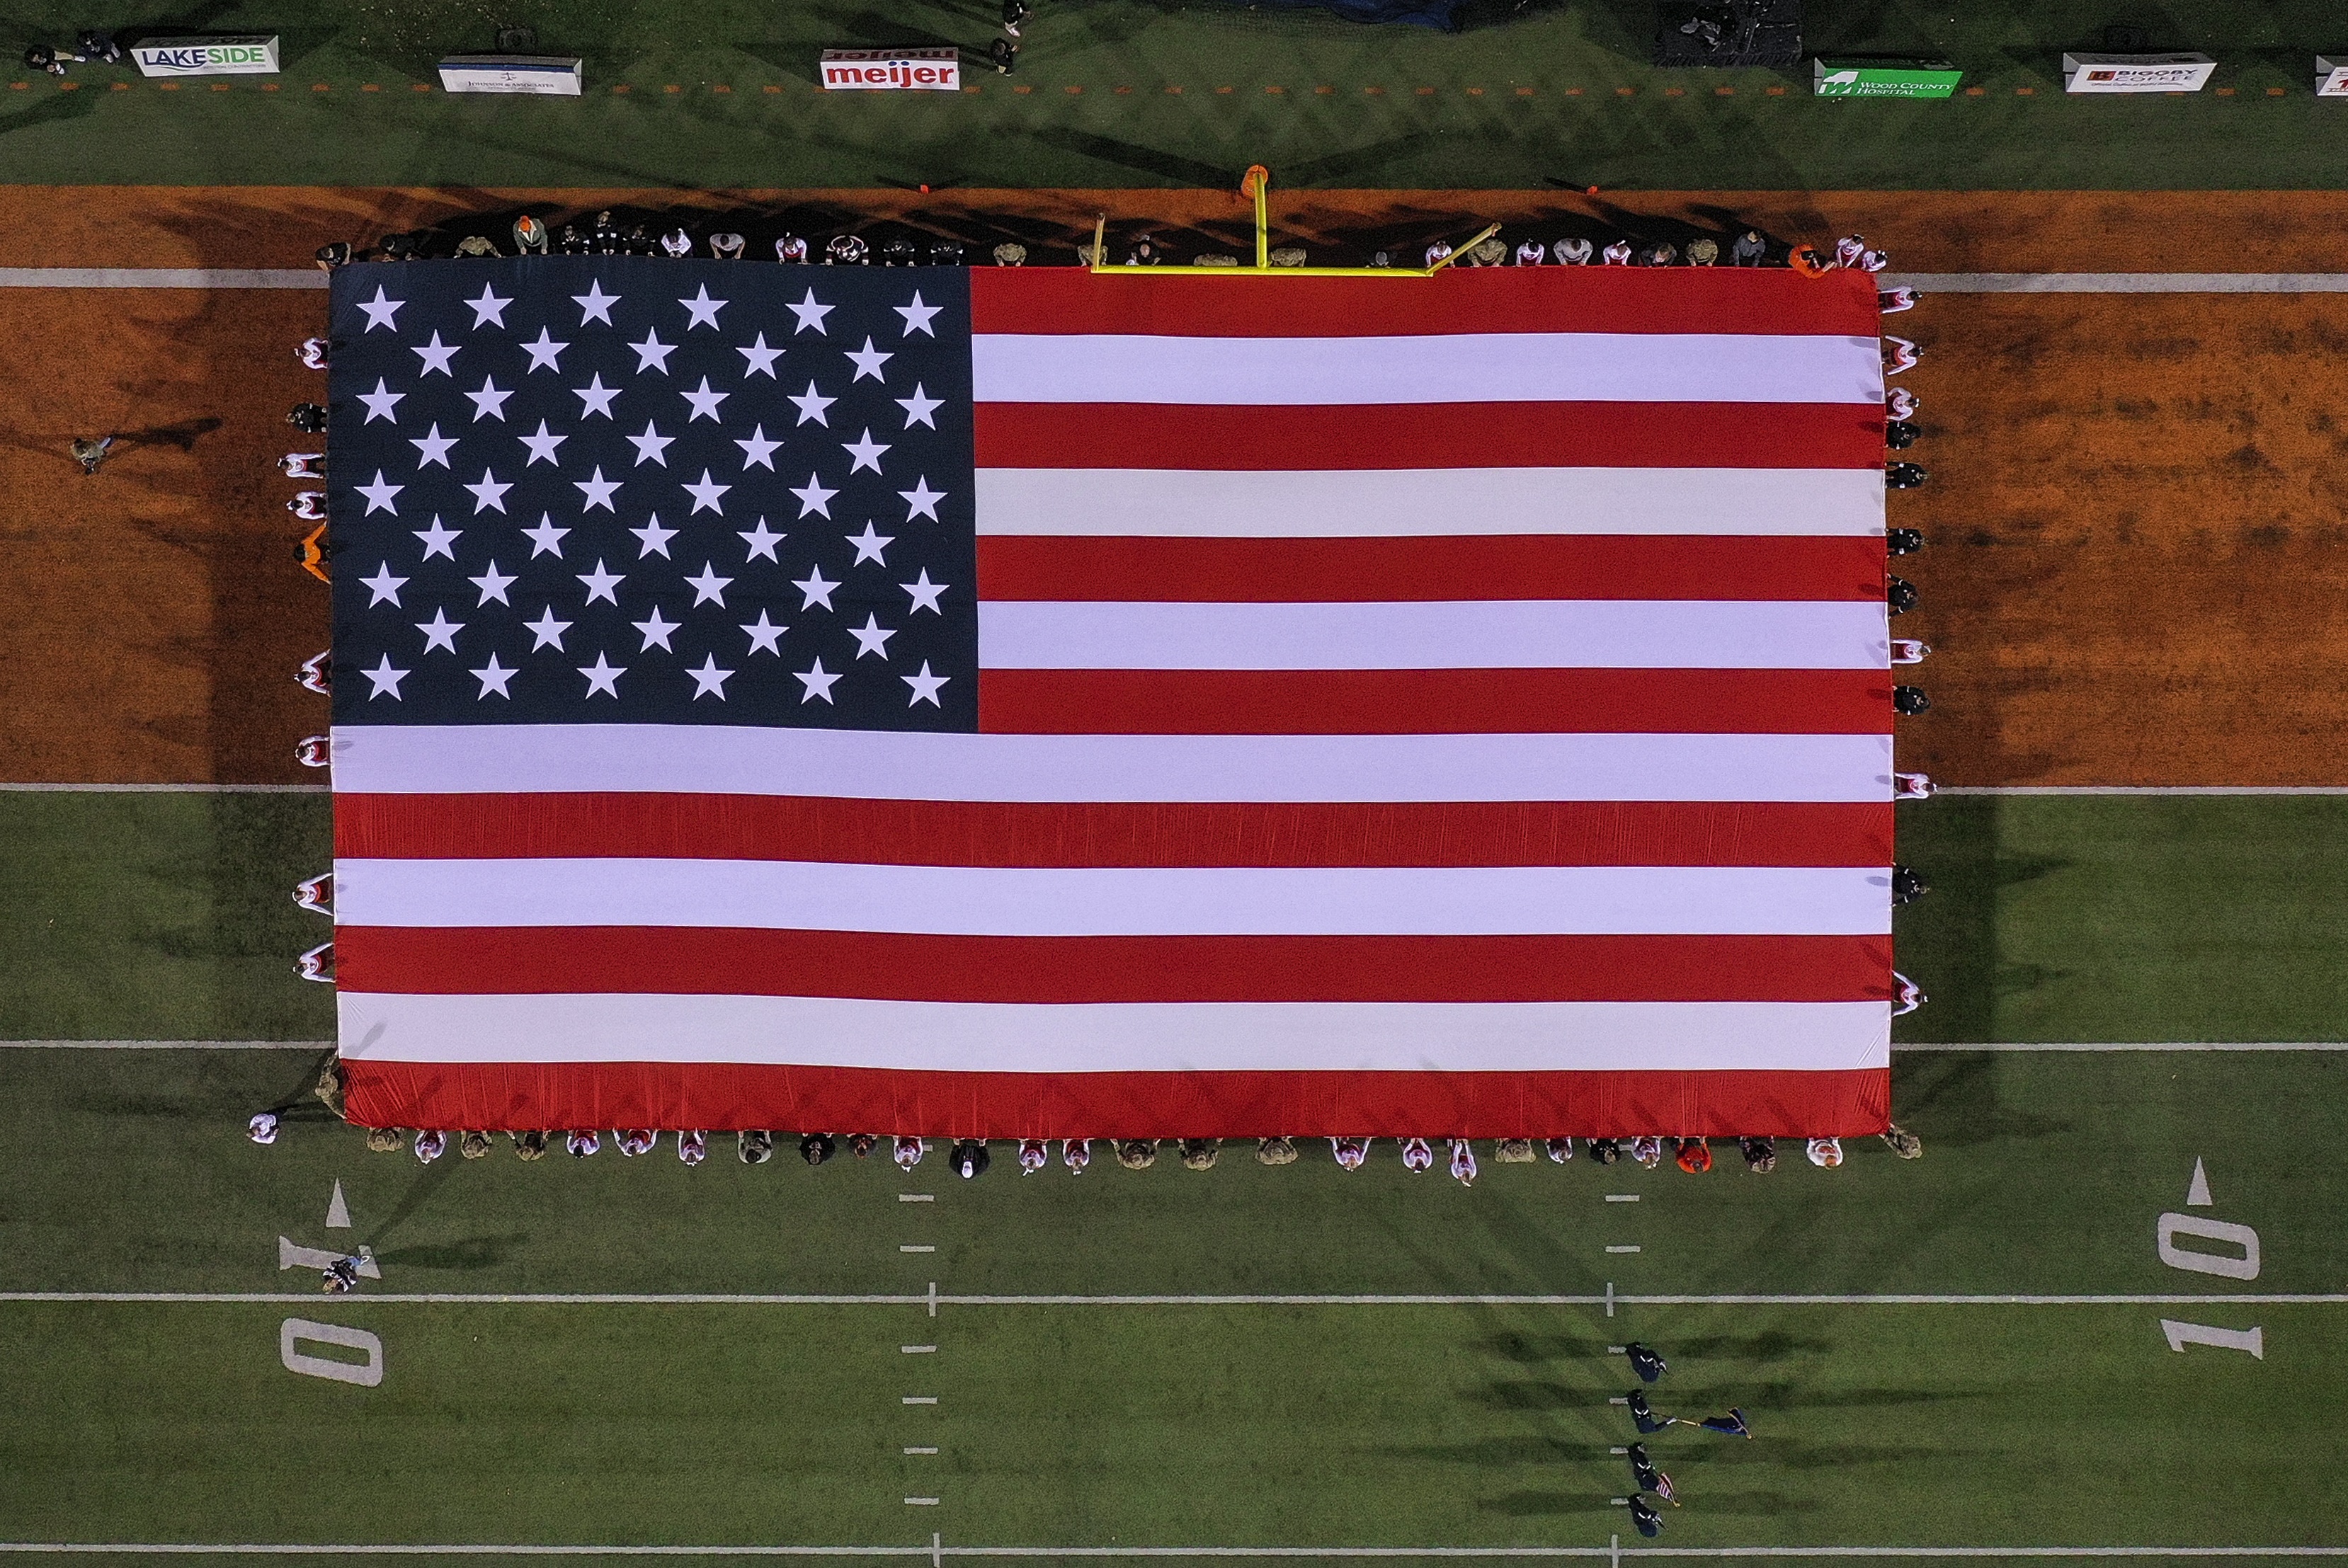 Large American flag is displayed in the end zone at Doyt L. Perry Stadium